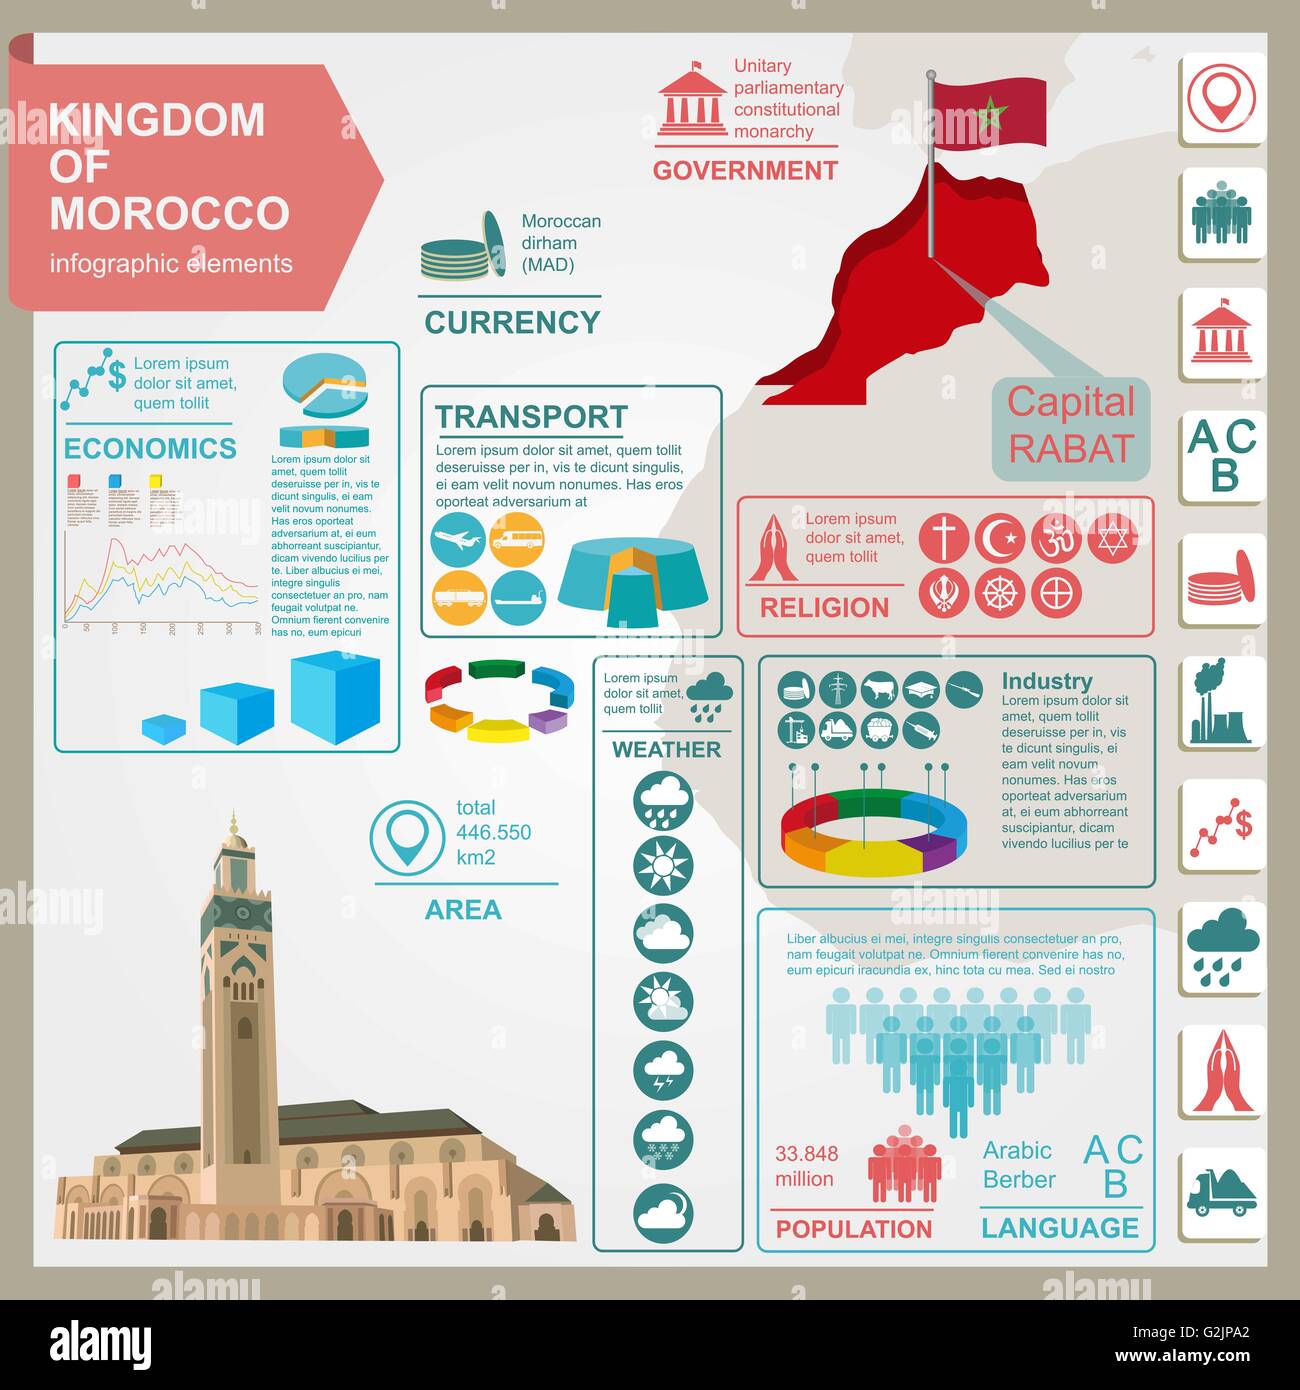 Kingdom of Morocco infographics, statistical data, sights. Hassan III Mosque in Casablanca. Vector illustration Stock Vector